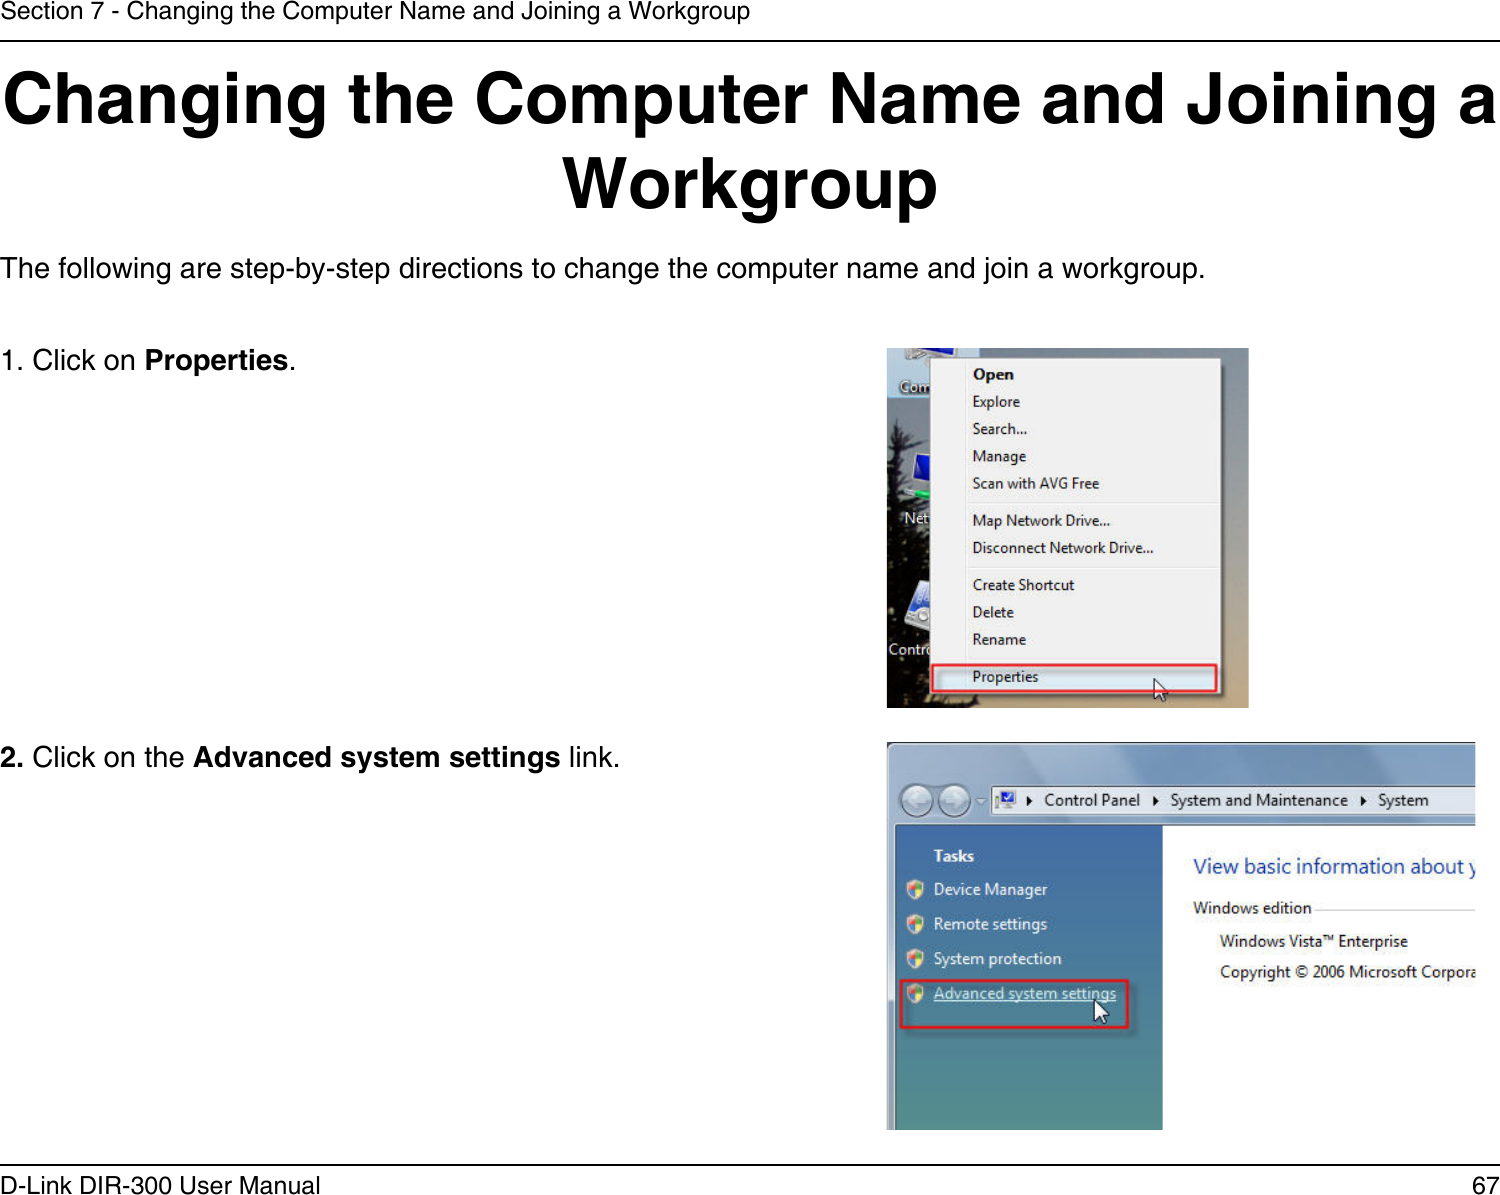 67D-Link DIR-300 User ManualSection 7 - Changing the Computer Name and Joining a WorkgroupChanging the Computer Name and Joining a WorkgroupThe following are step-by-step directions to change the computer name and join a workgroup.      2. Click on the Advanced system settings link. 1. Click on Properties.     